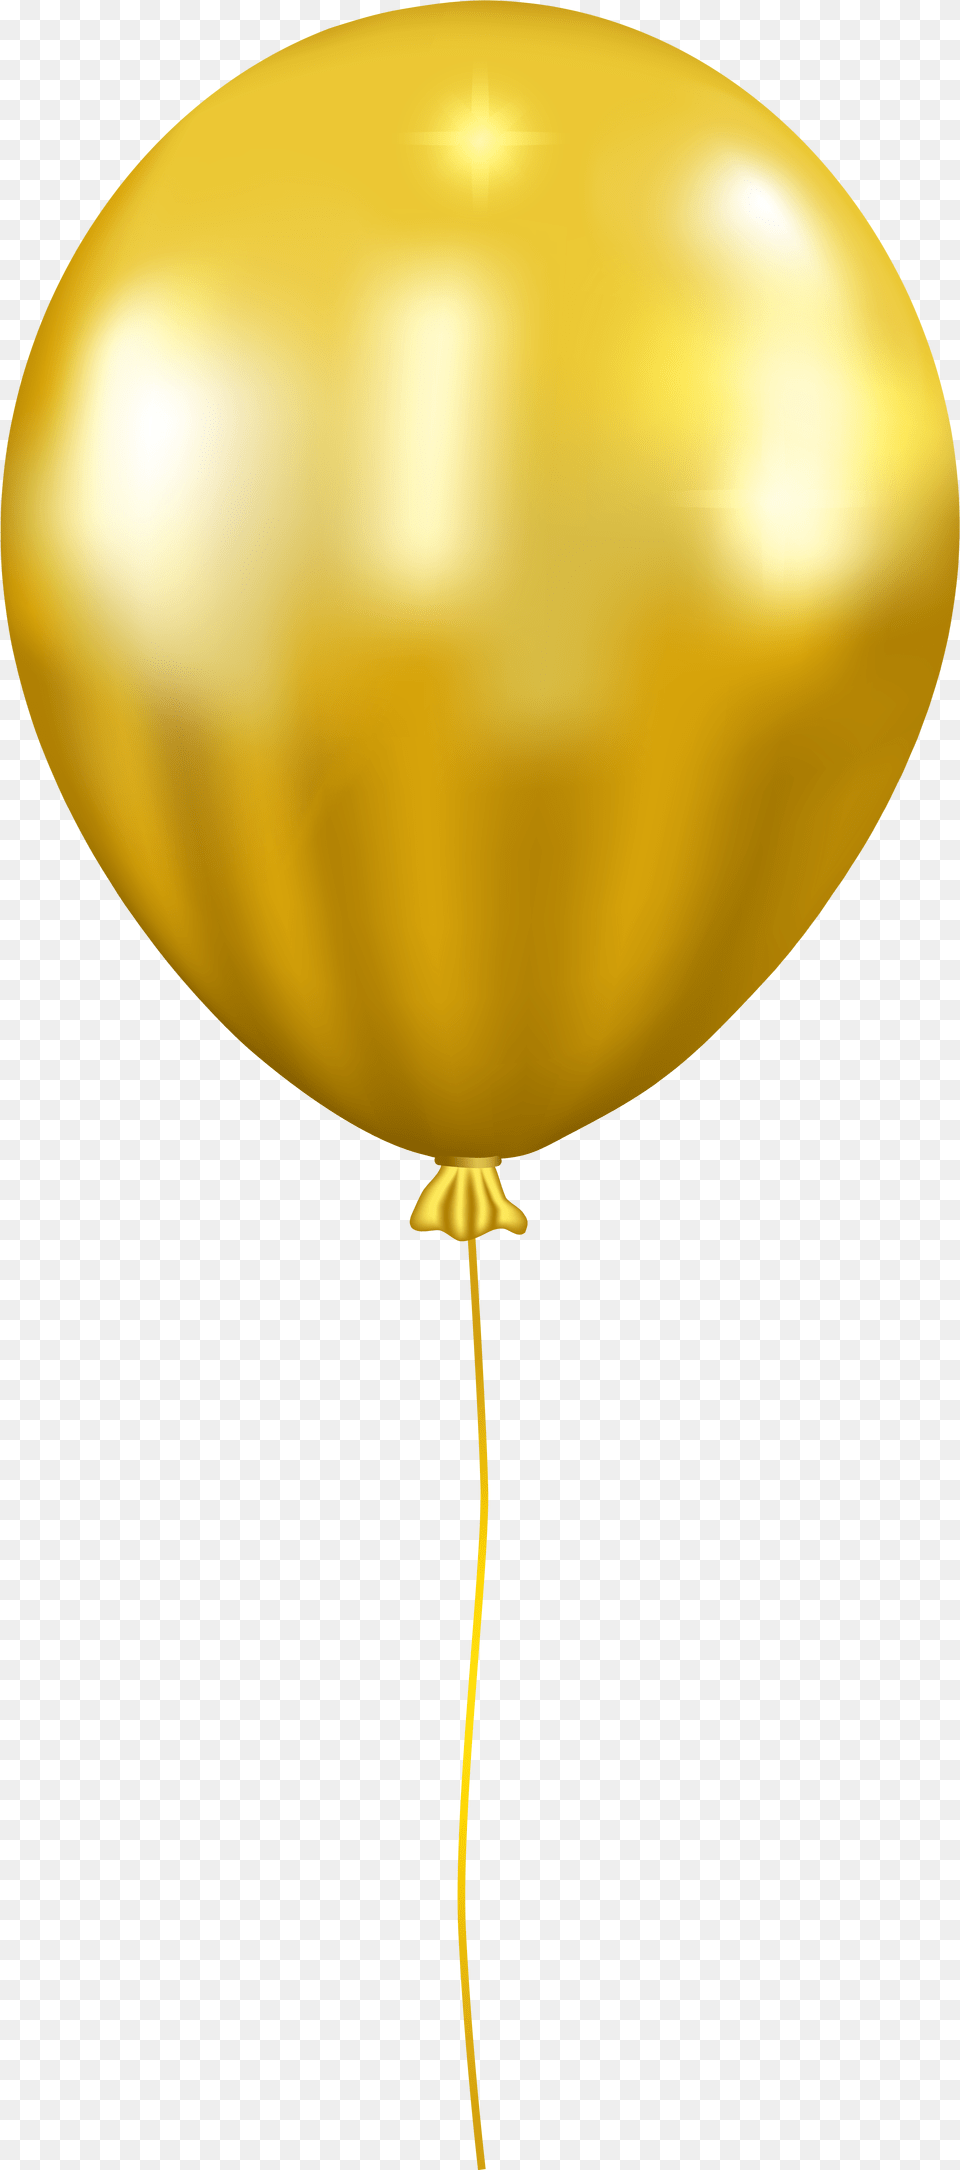 Gold Balloon Transparent Image Gallery High Resolution Gold Balloon, Lamp, Astronomy, Moon, Nature Free Png